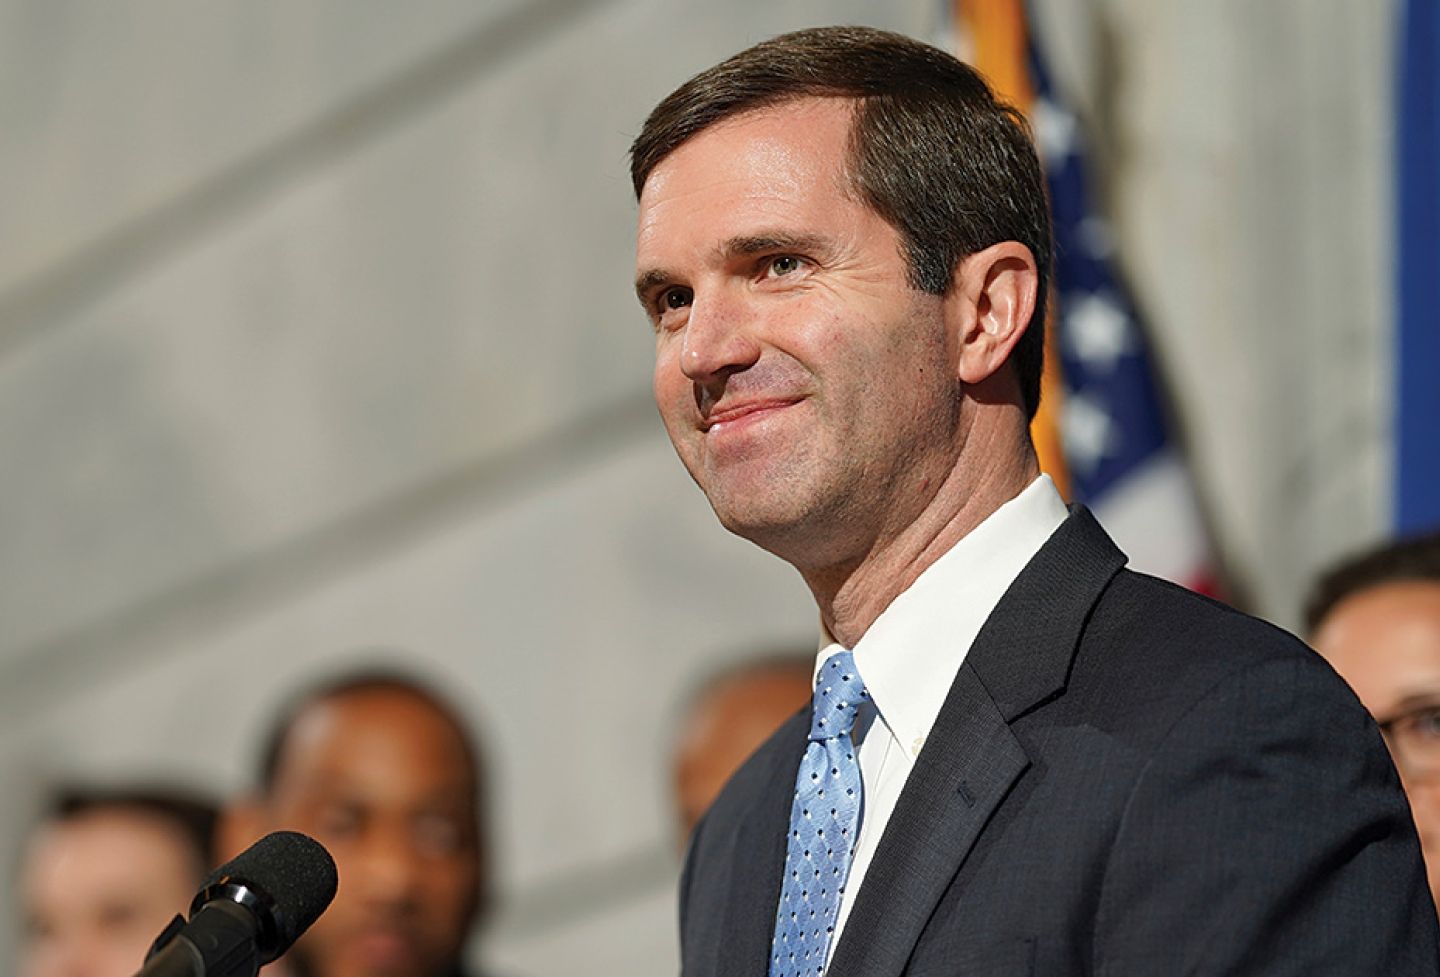 Andy Beshear ’03 was interviewed by UVA Lawyer after being elected governor of Kentucky.